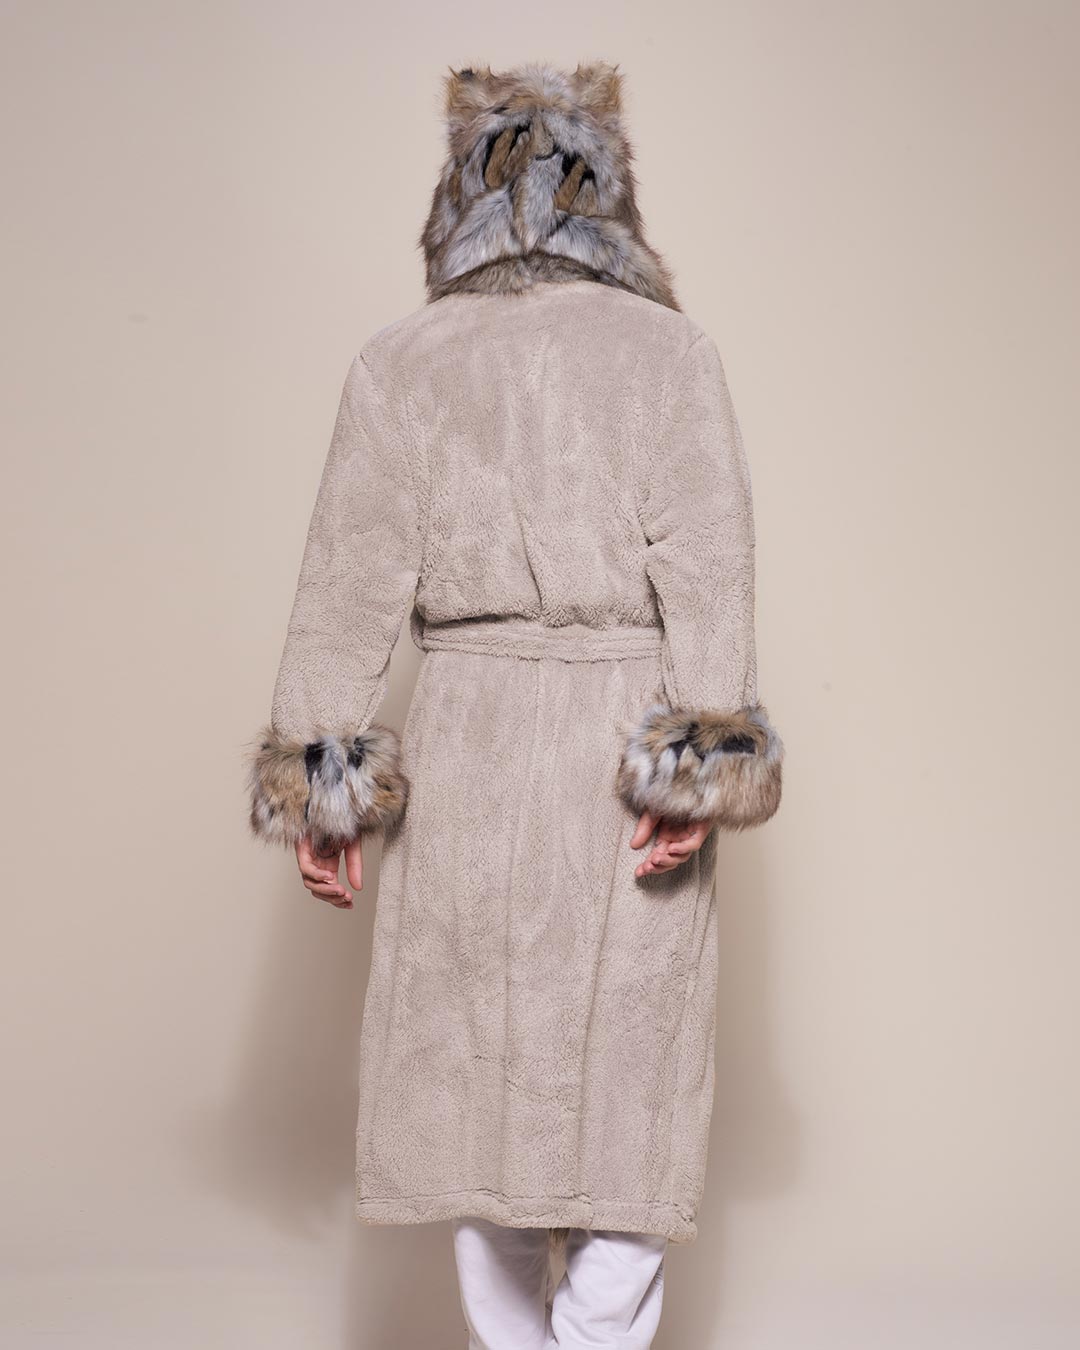 Back View of Wolverine Classic Faux Fur Robe with hood on Man